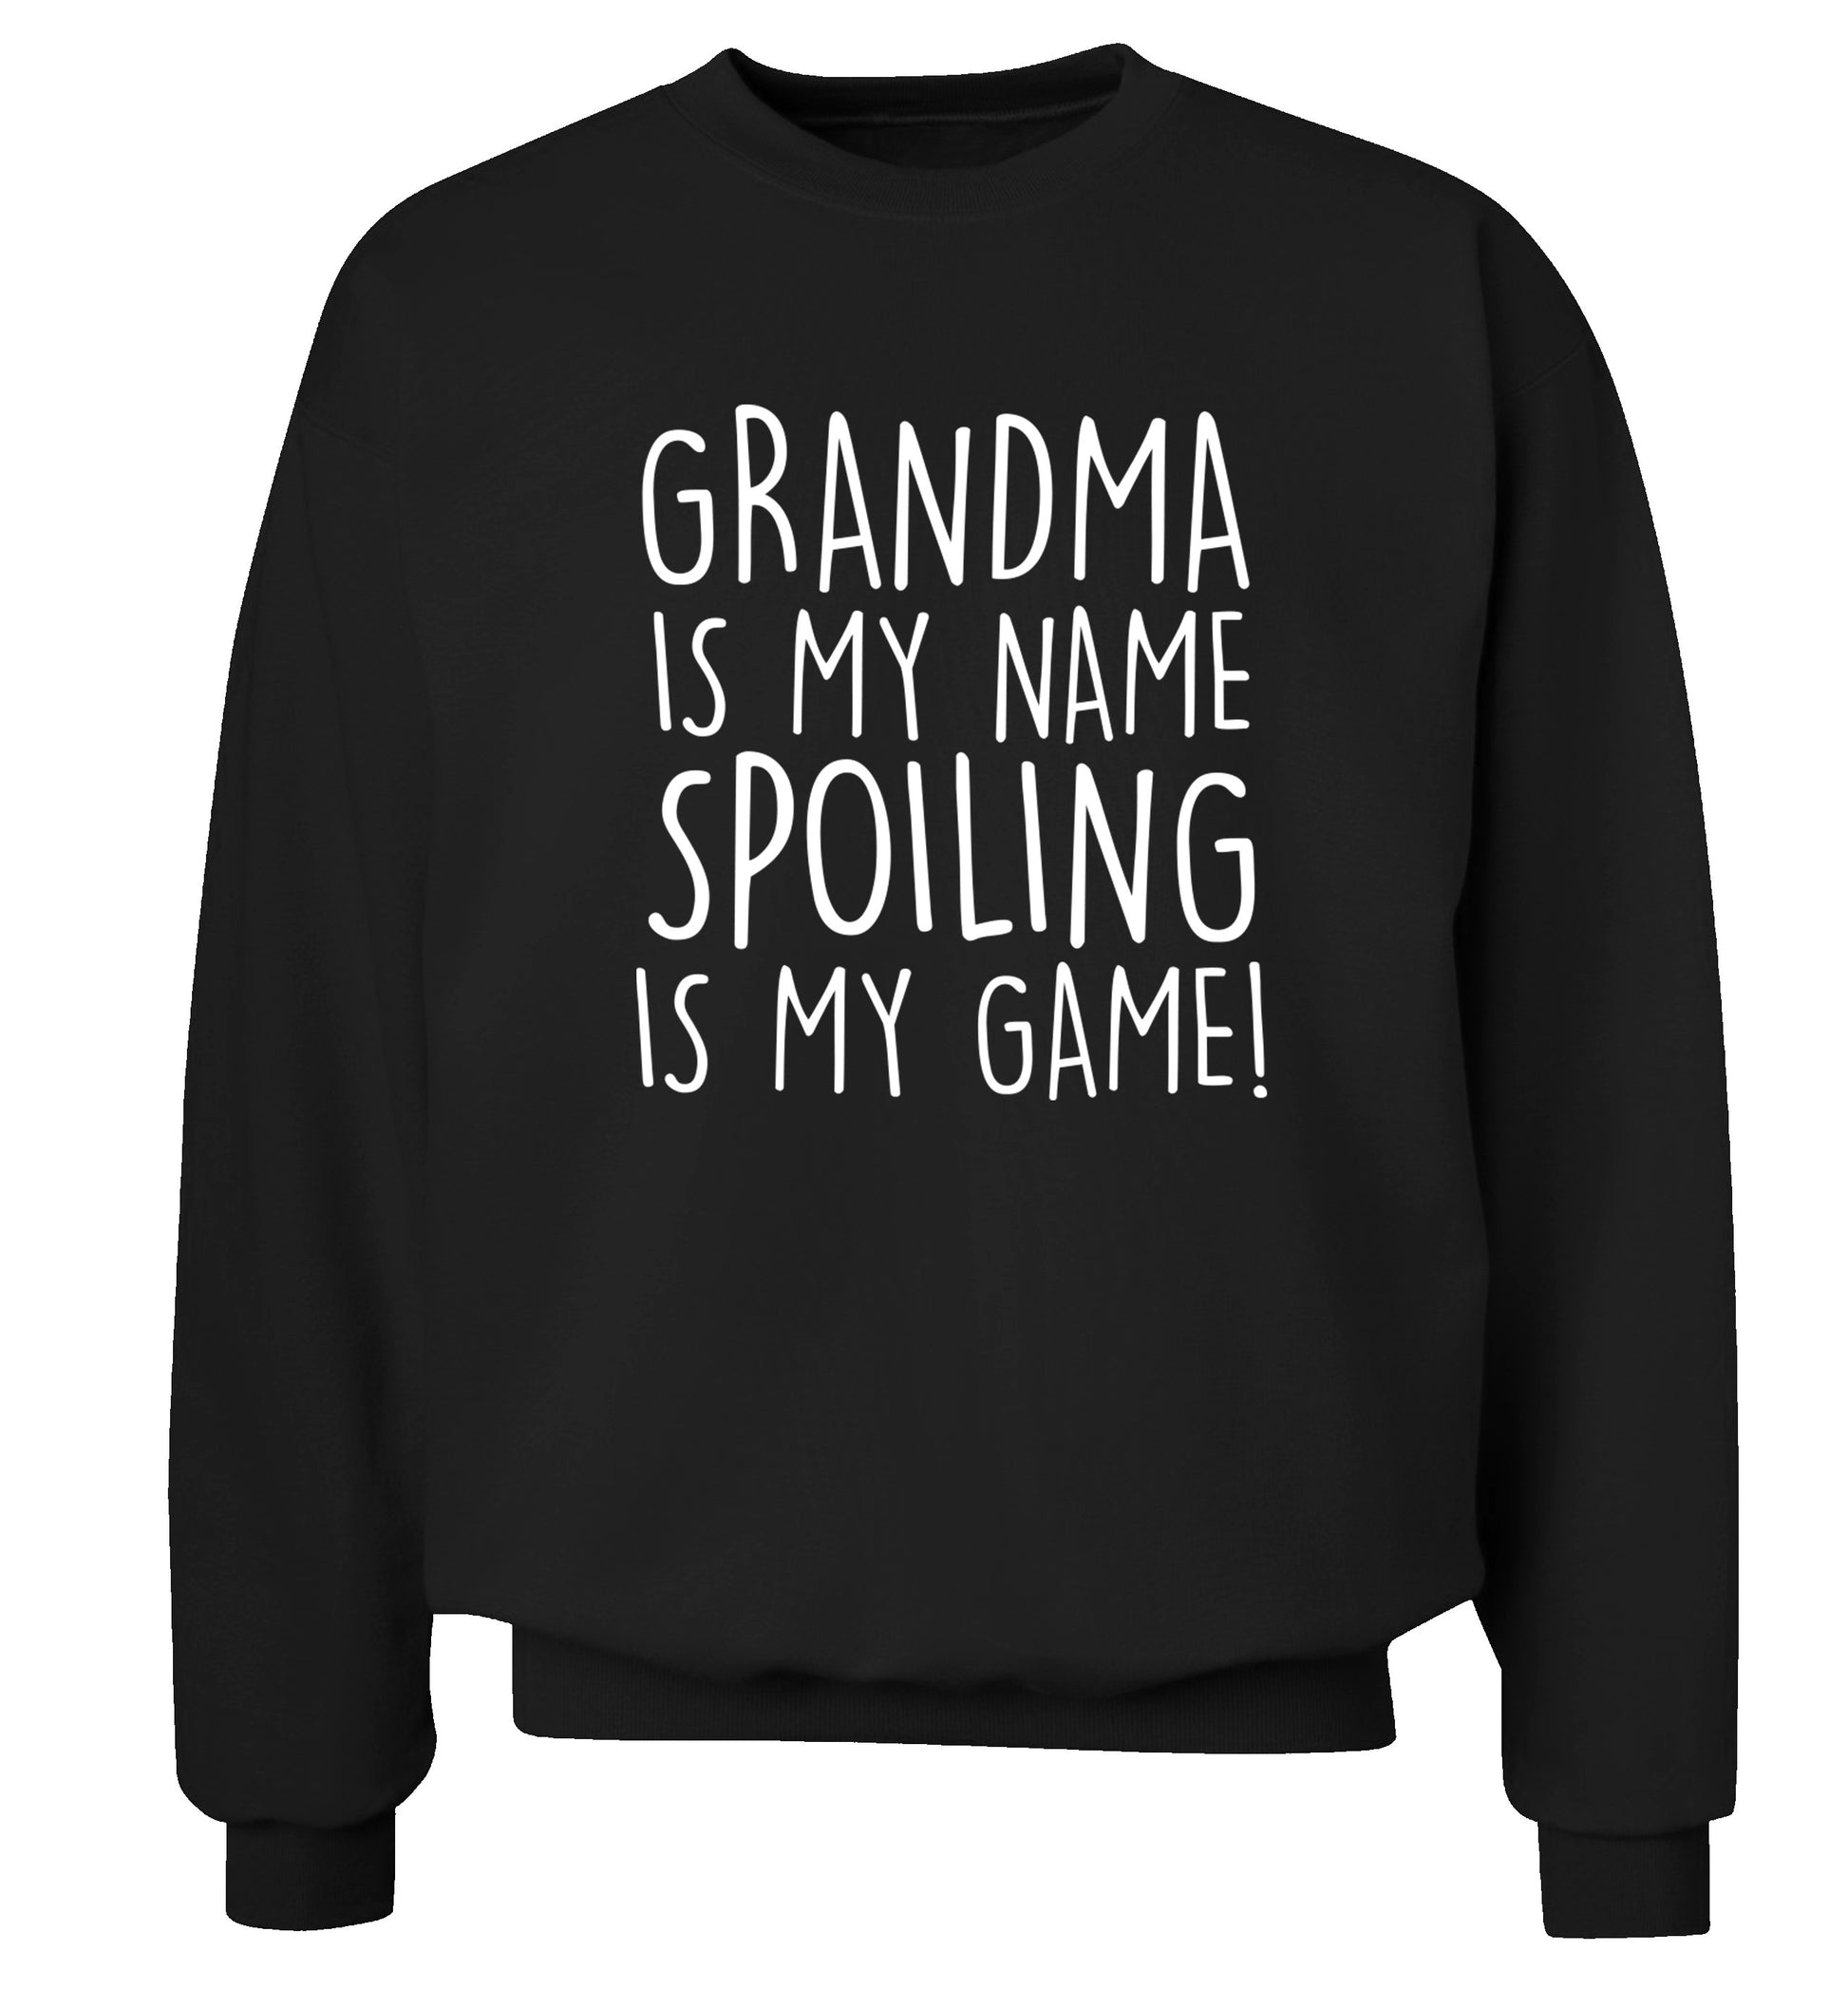 Grandma is my name, spoiling is my game Adult's unisex black Sweater 2XL